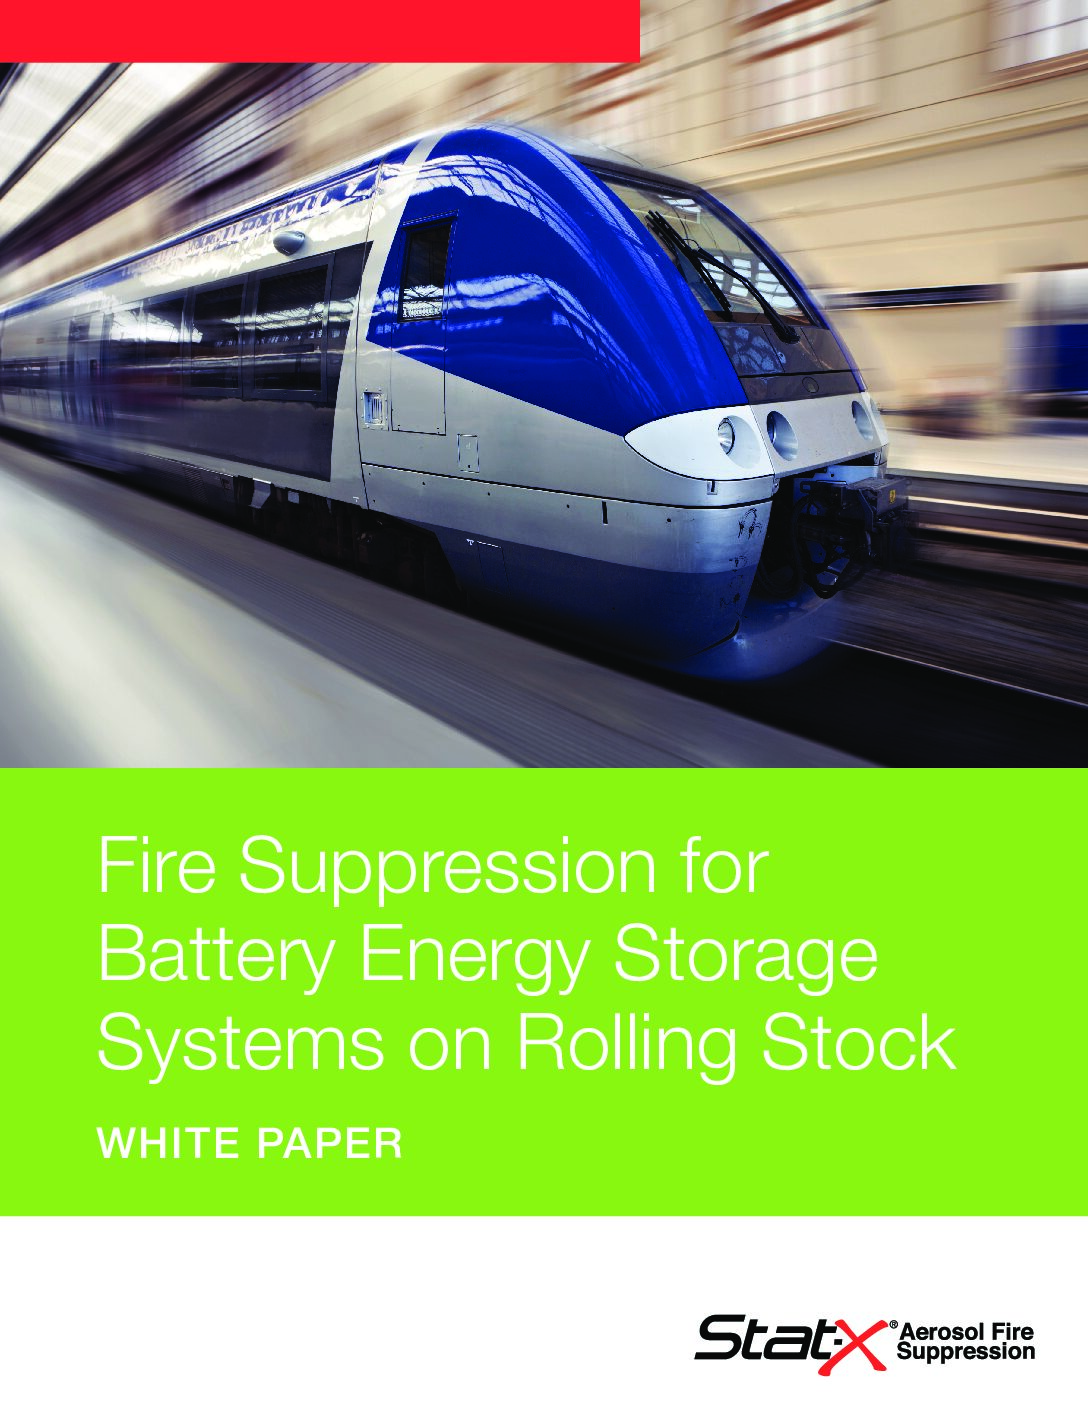 Fire Suppression for Battery Energy Storage Systems on Rolling Stock